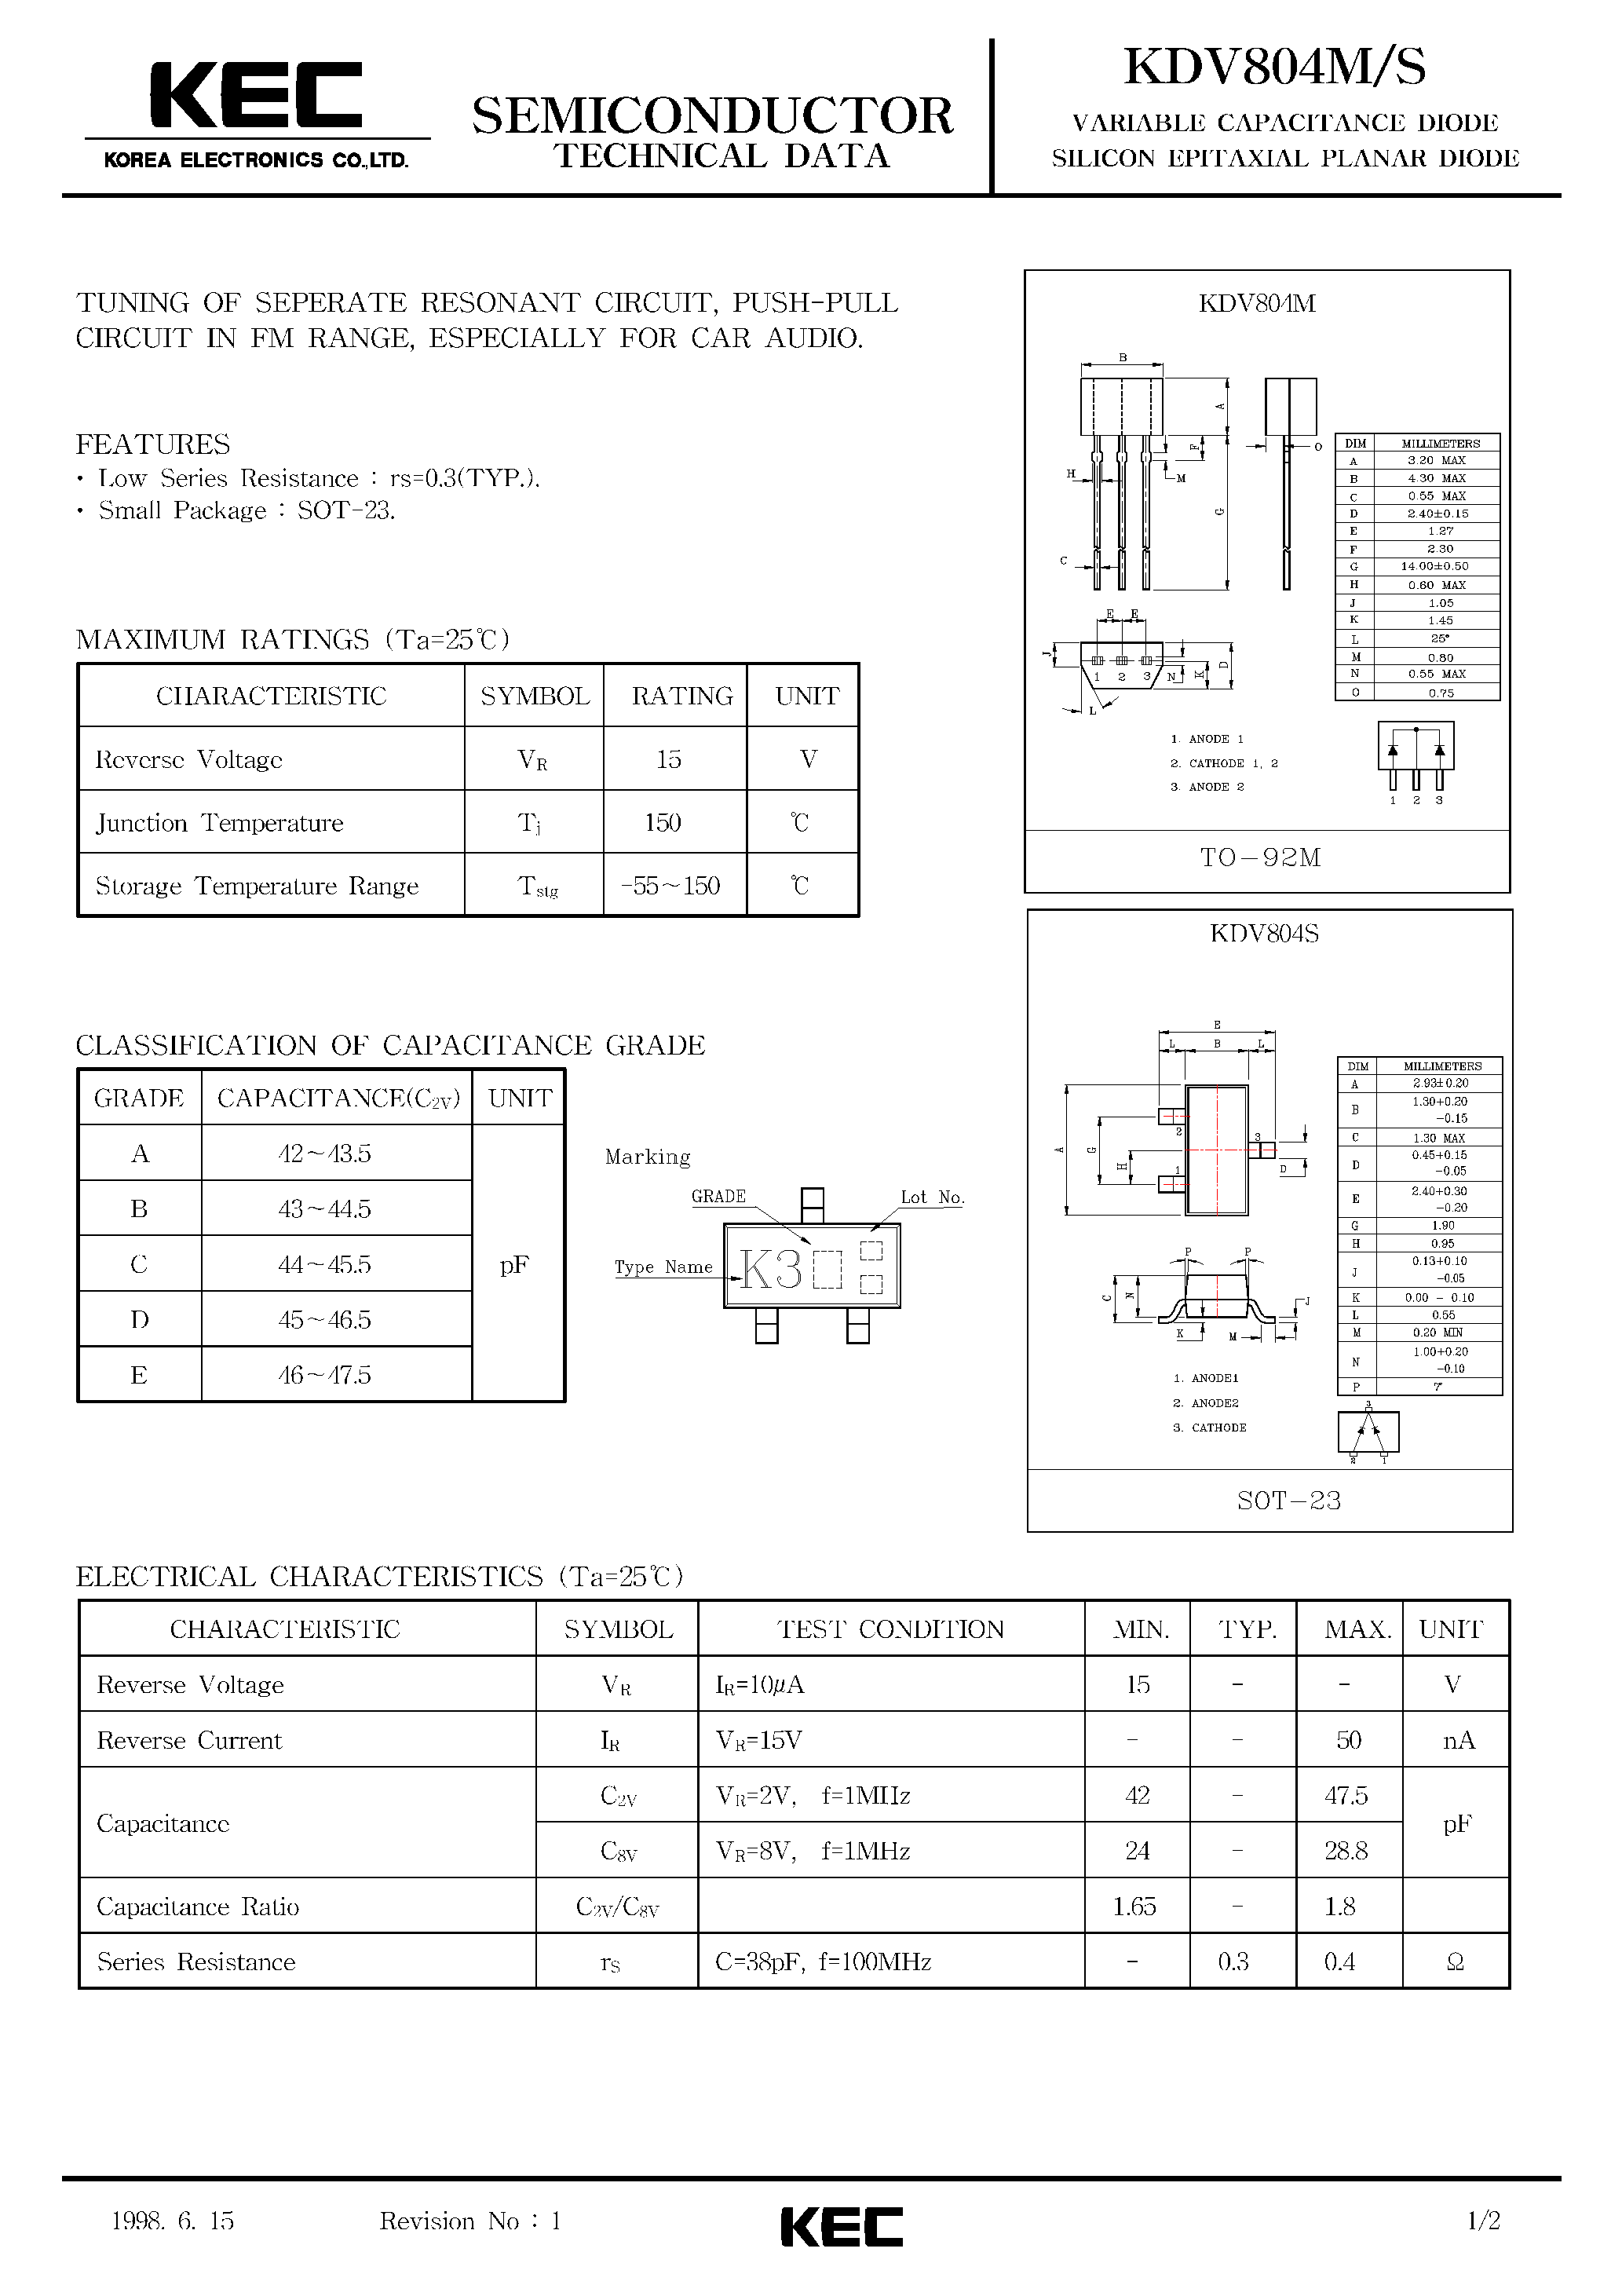 Datasheet KDV804 - VARIABLE CAPACITANCE DIODE SILICON EPITAXIAL PLANAR DIODE(TUNING OF SEPERATE RESONANT CIRCUIT) page 1